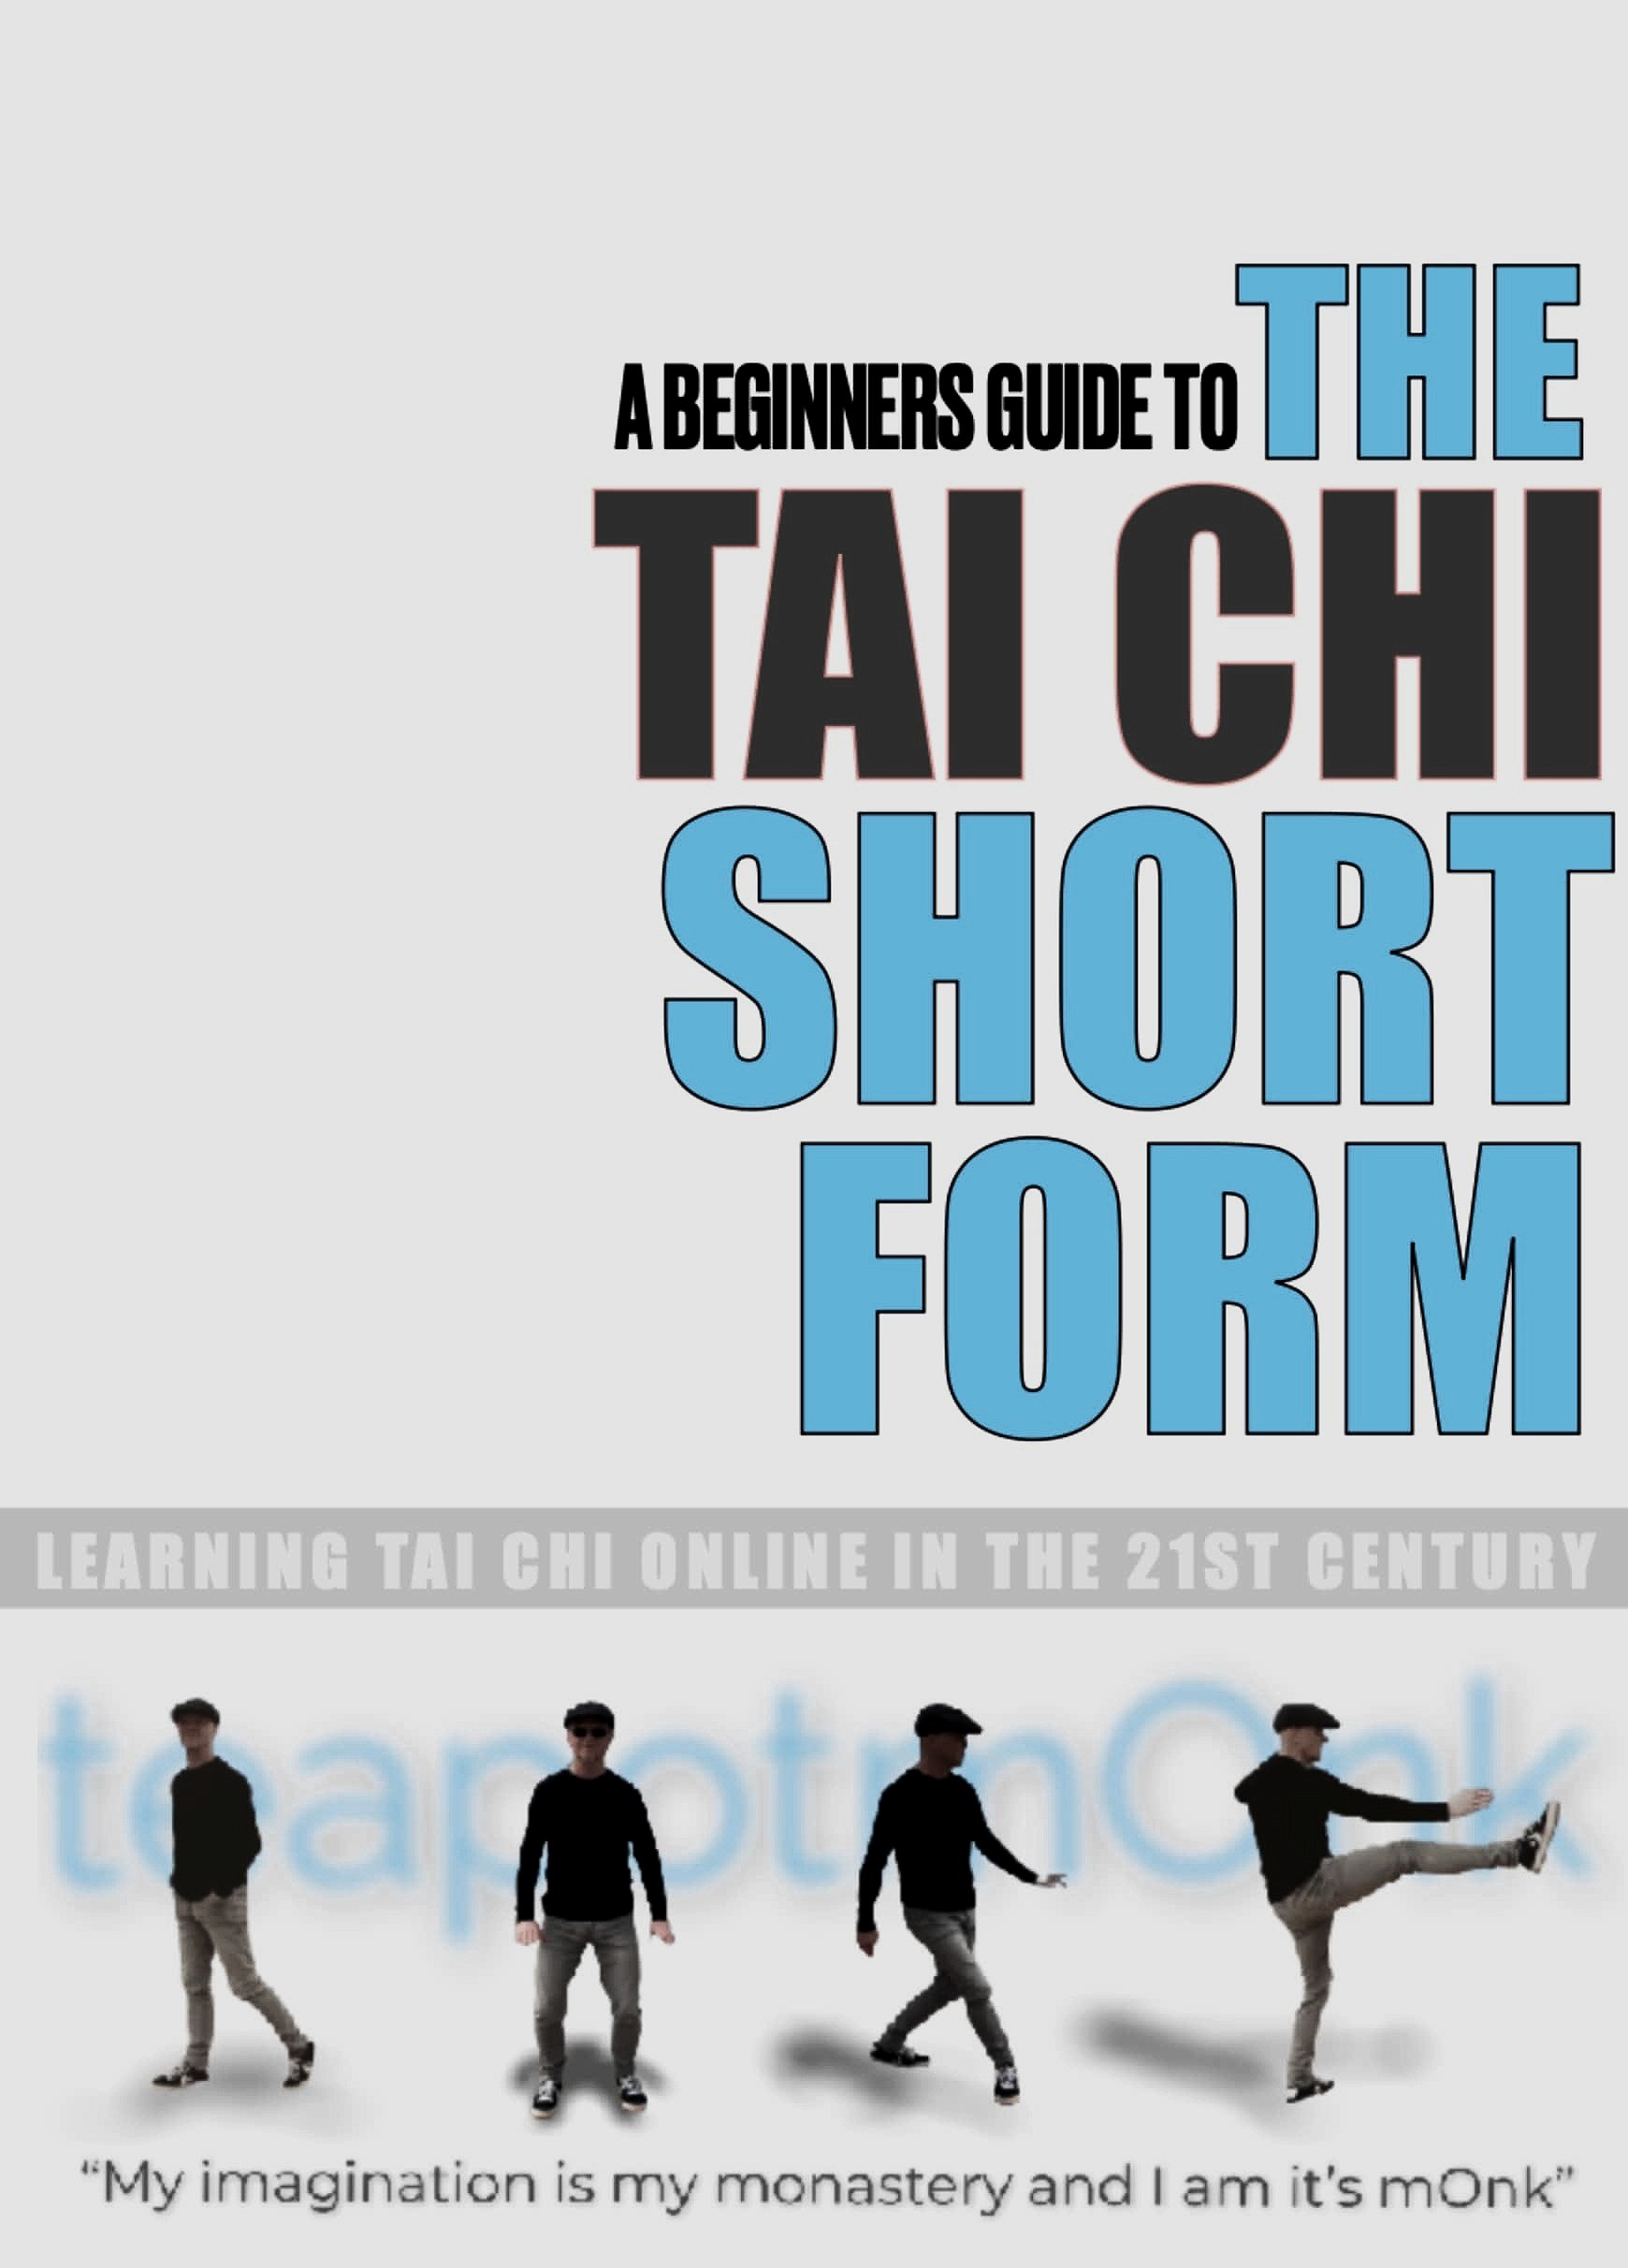 Guide to Tai Chi Forms